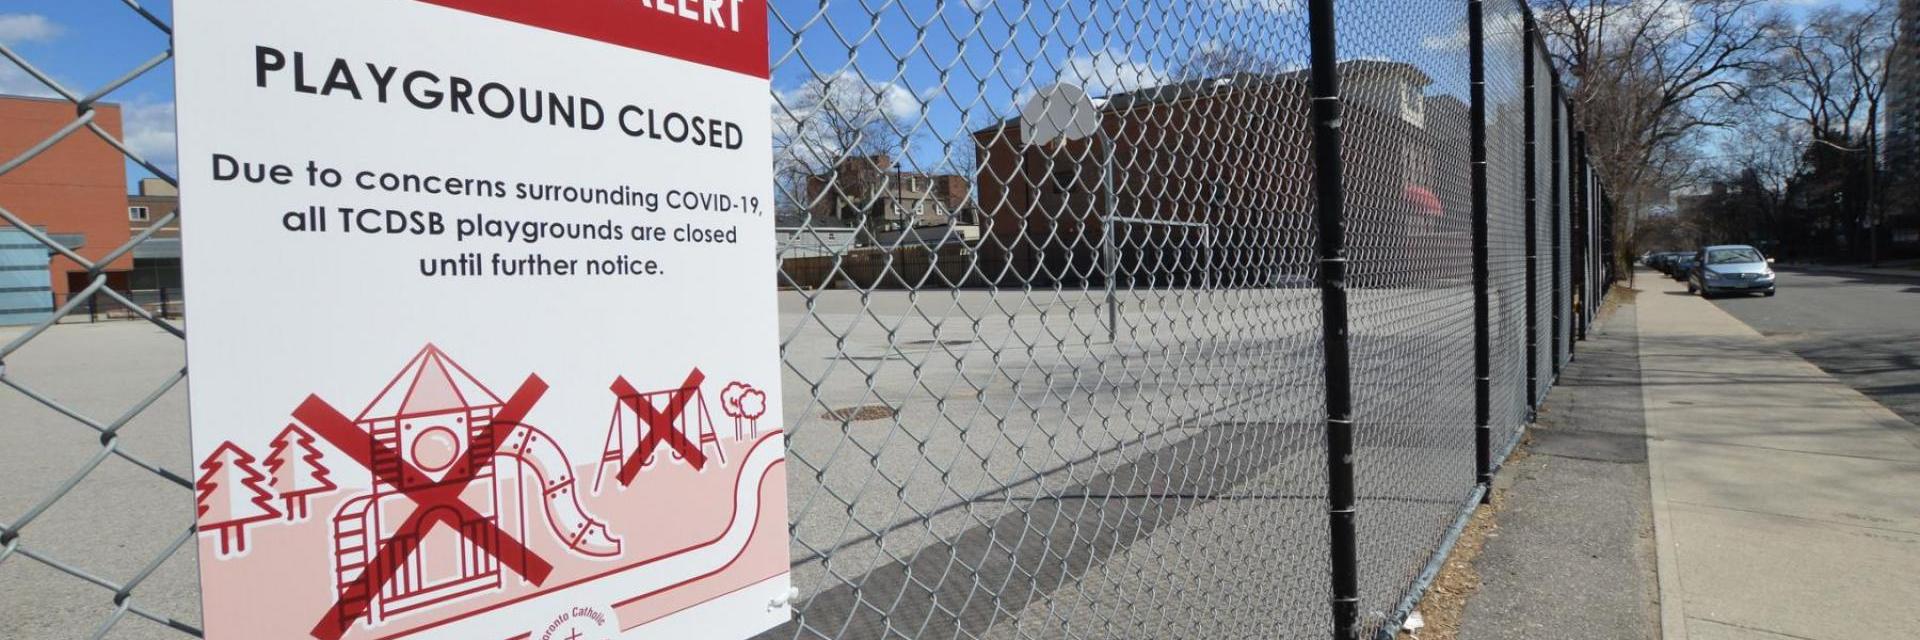 Sign reads Playground Closed, on a chain link fence around a basketball court 